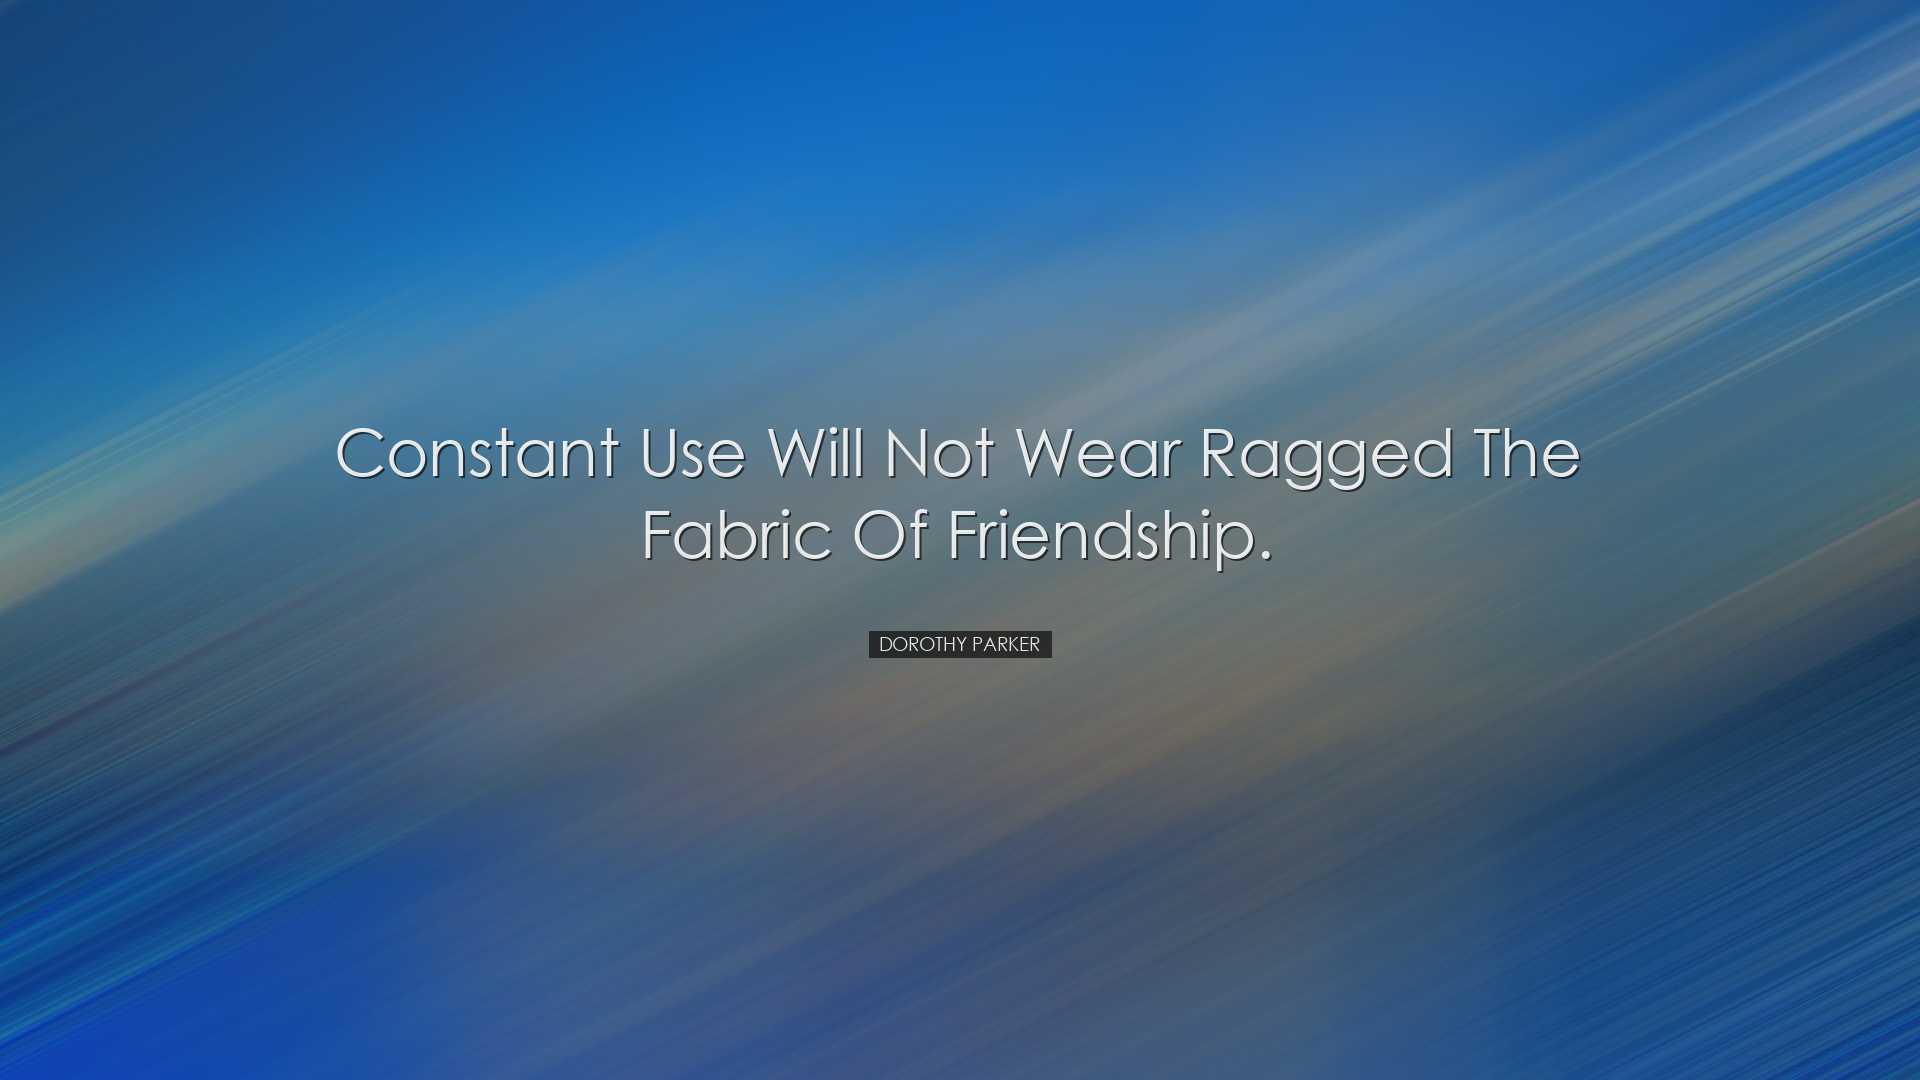 Constant use will not wear ragged the fabric of friendship. - Doro